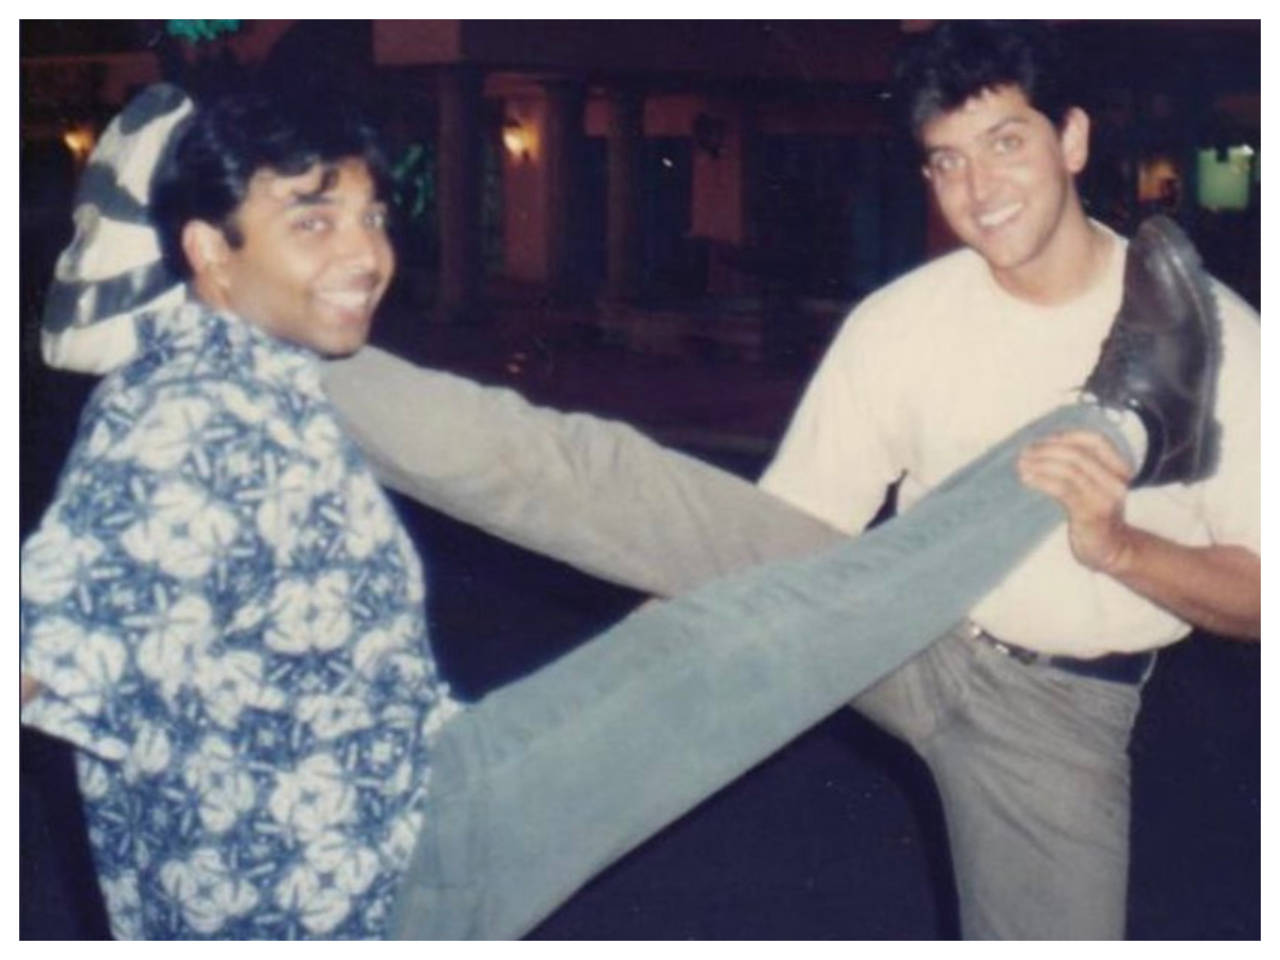 THIS picture of Hrithik Roshan and Uday Chopra speaks volumes about their  bond as friends | Hindi Movie News - Times of India